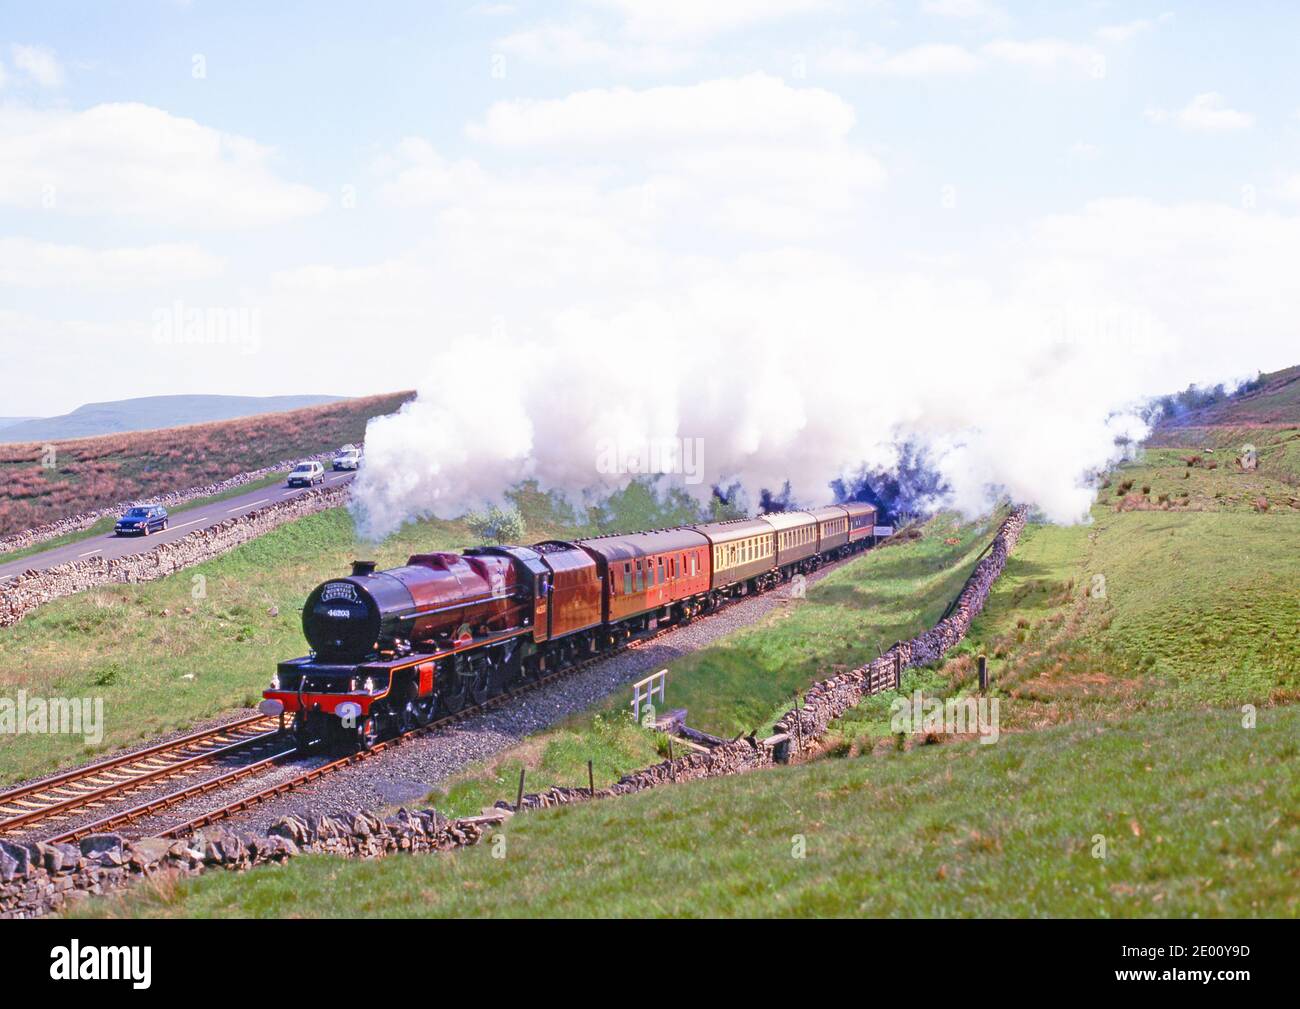 Cumbrian Mountain Express coming out of Shotlock Hill Tunnel, Settle to Carlisle railway, England Stock Photo